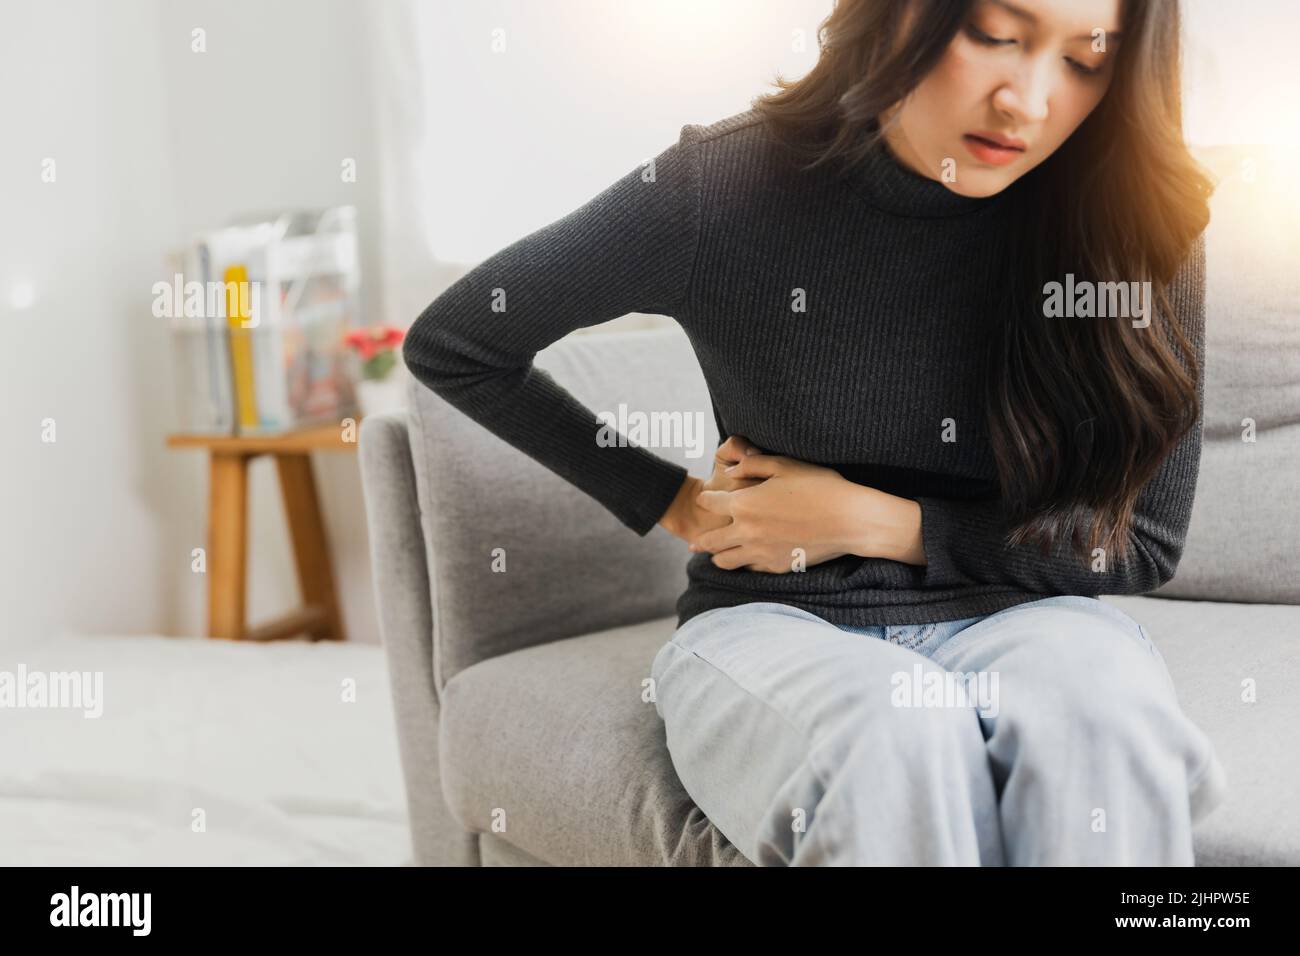 Young woman suffering from strong abdominal pain while sitting on sofa at home Stock Photo